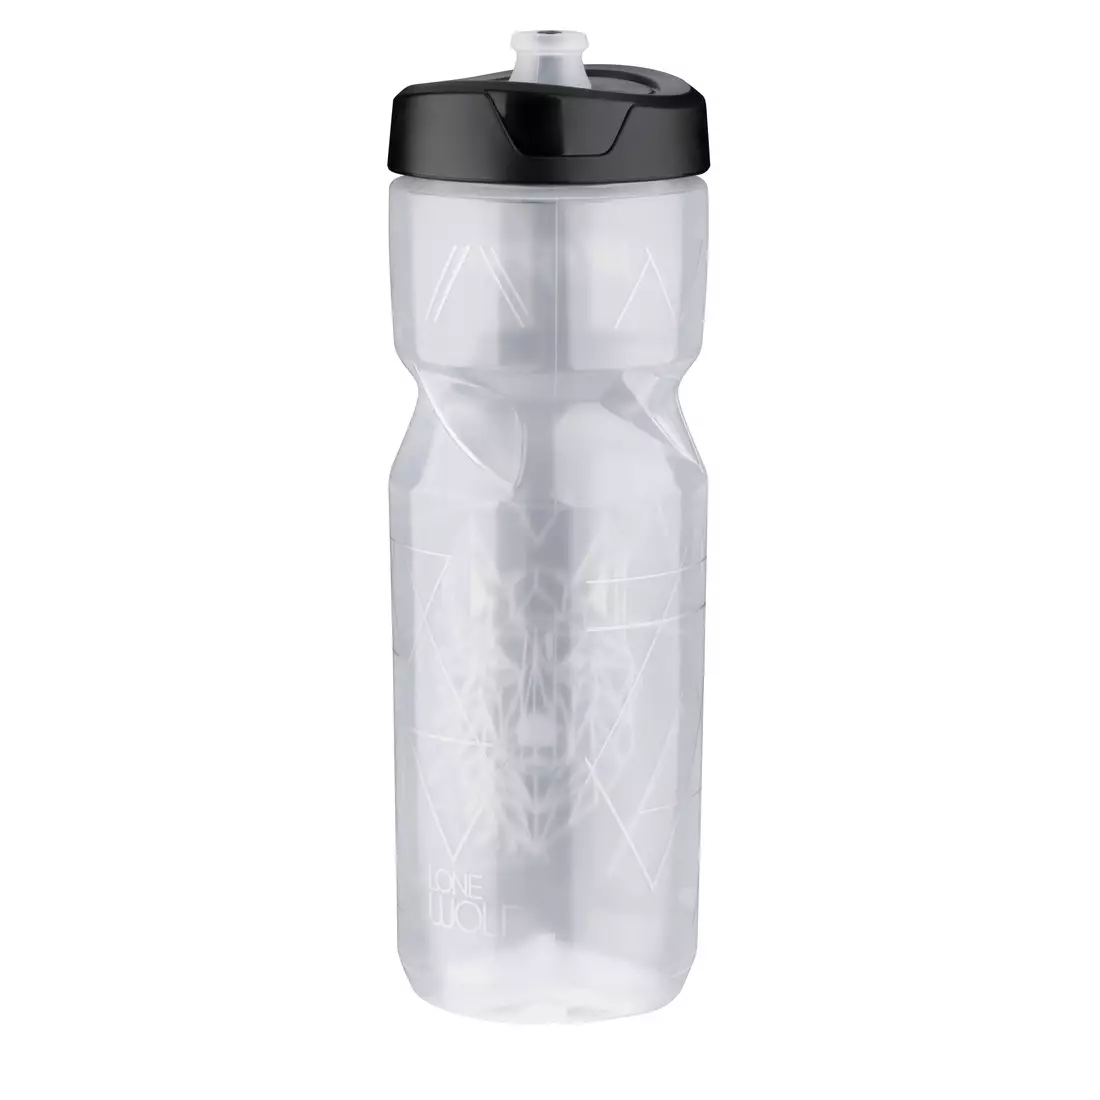 FORCE bottle LONE WOLF 0.8 l, transparent silver, 25586